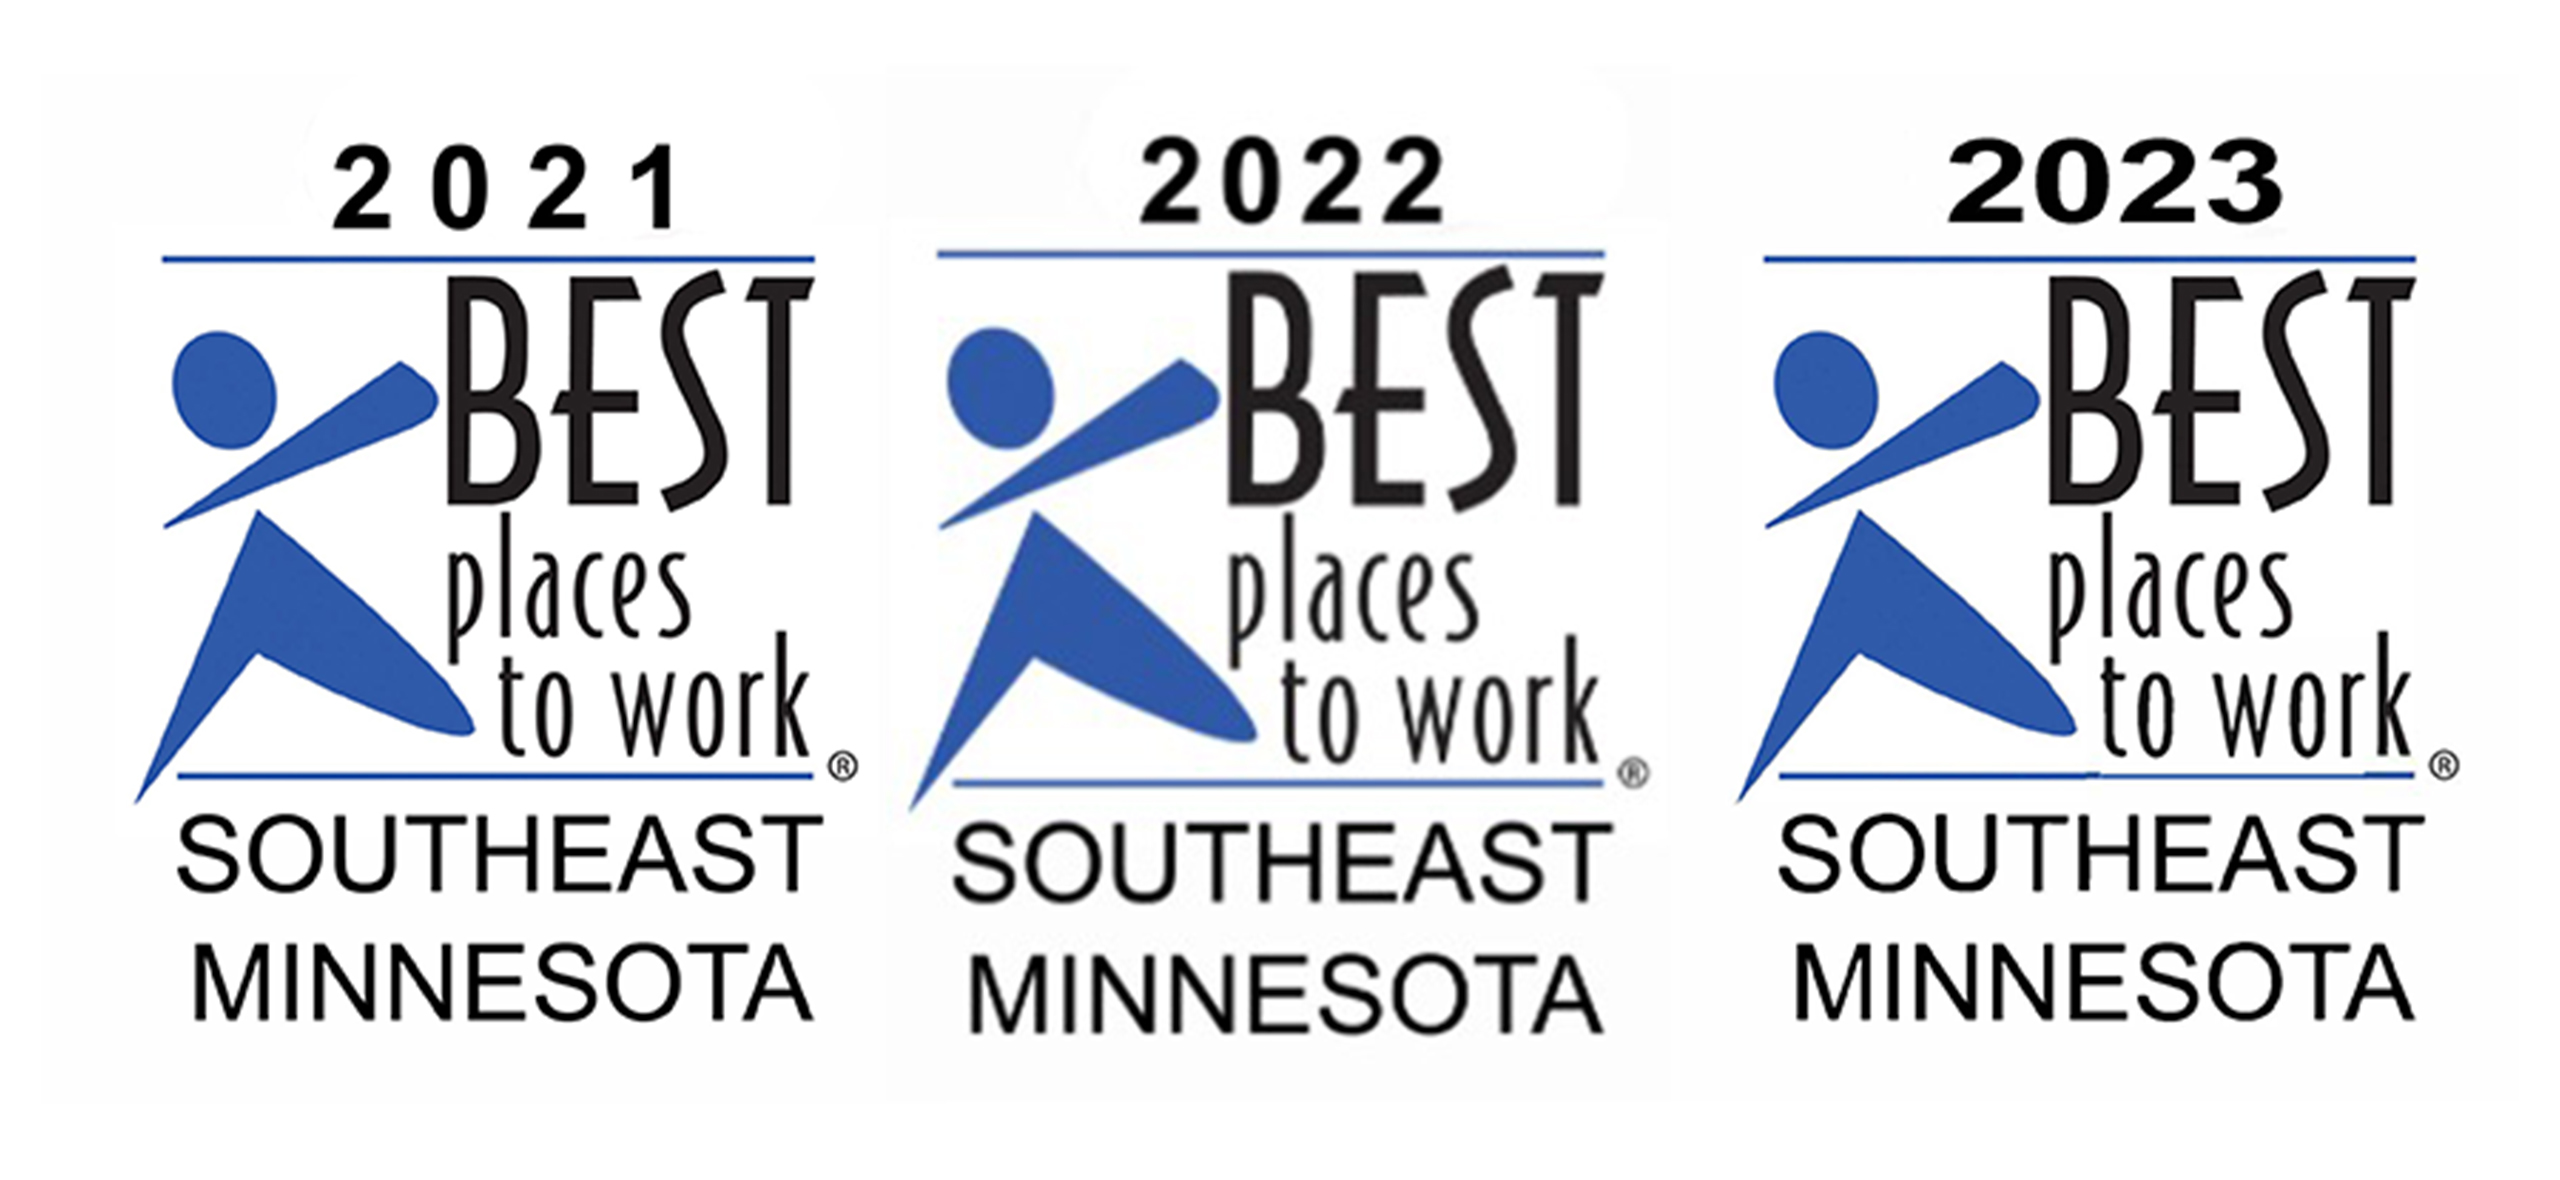 Best places to work 2021-2023